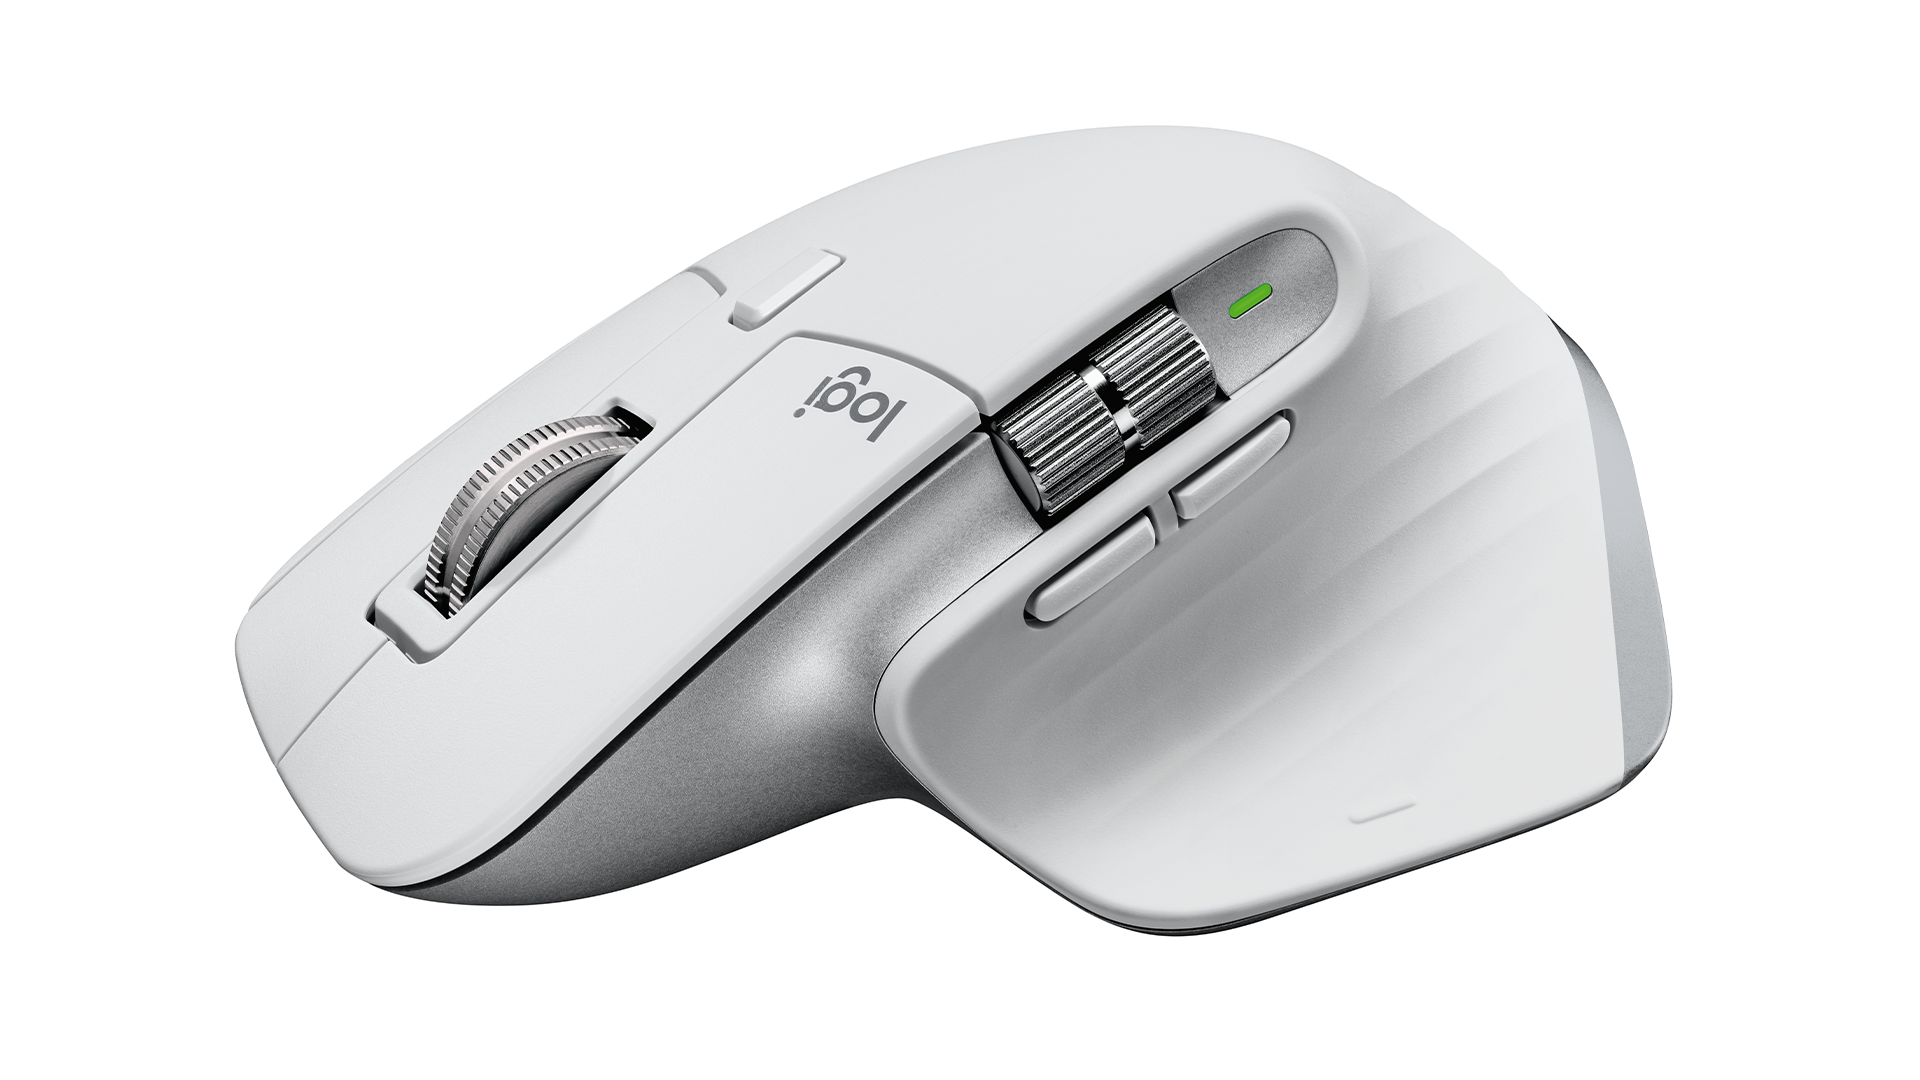 The Logitech MX Master 3S mouse in white.